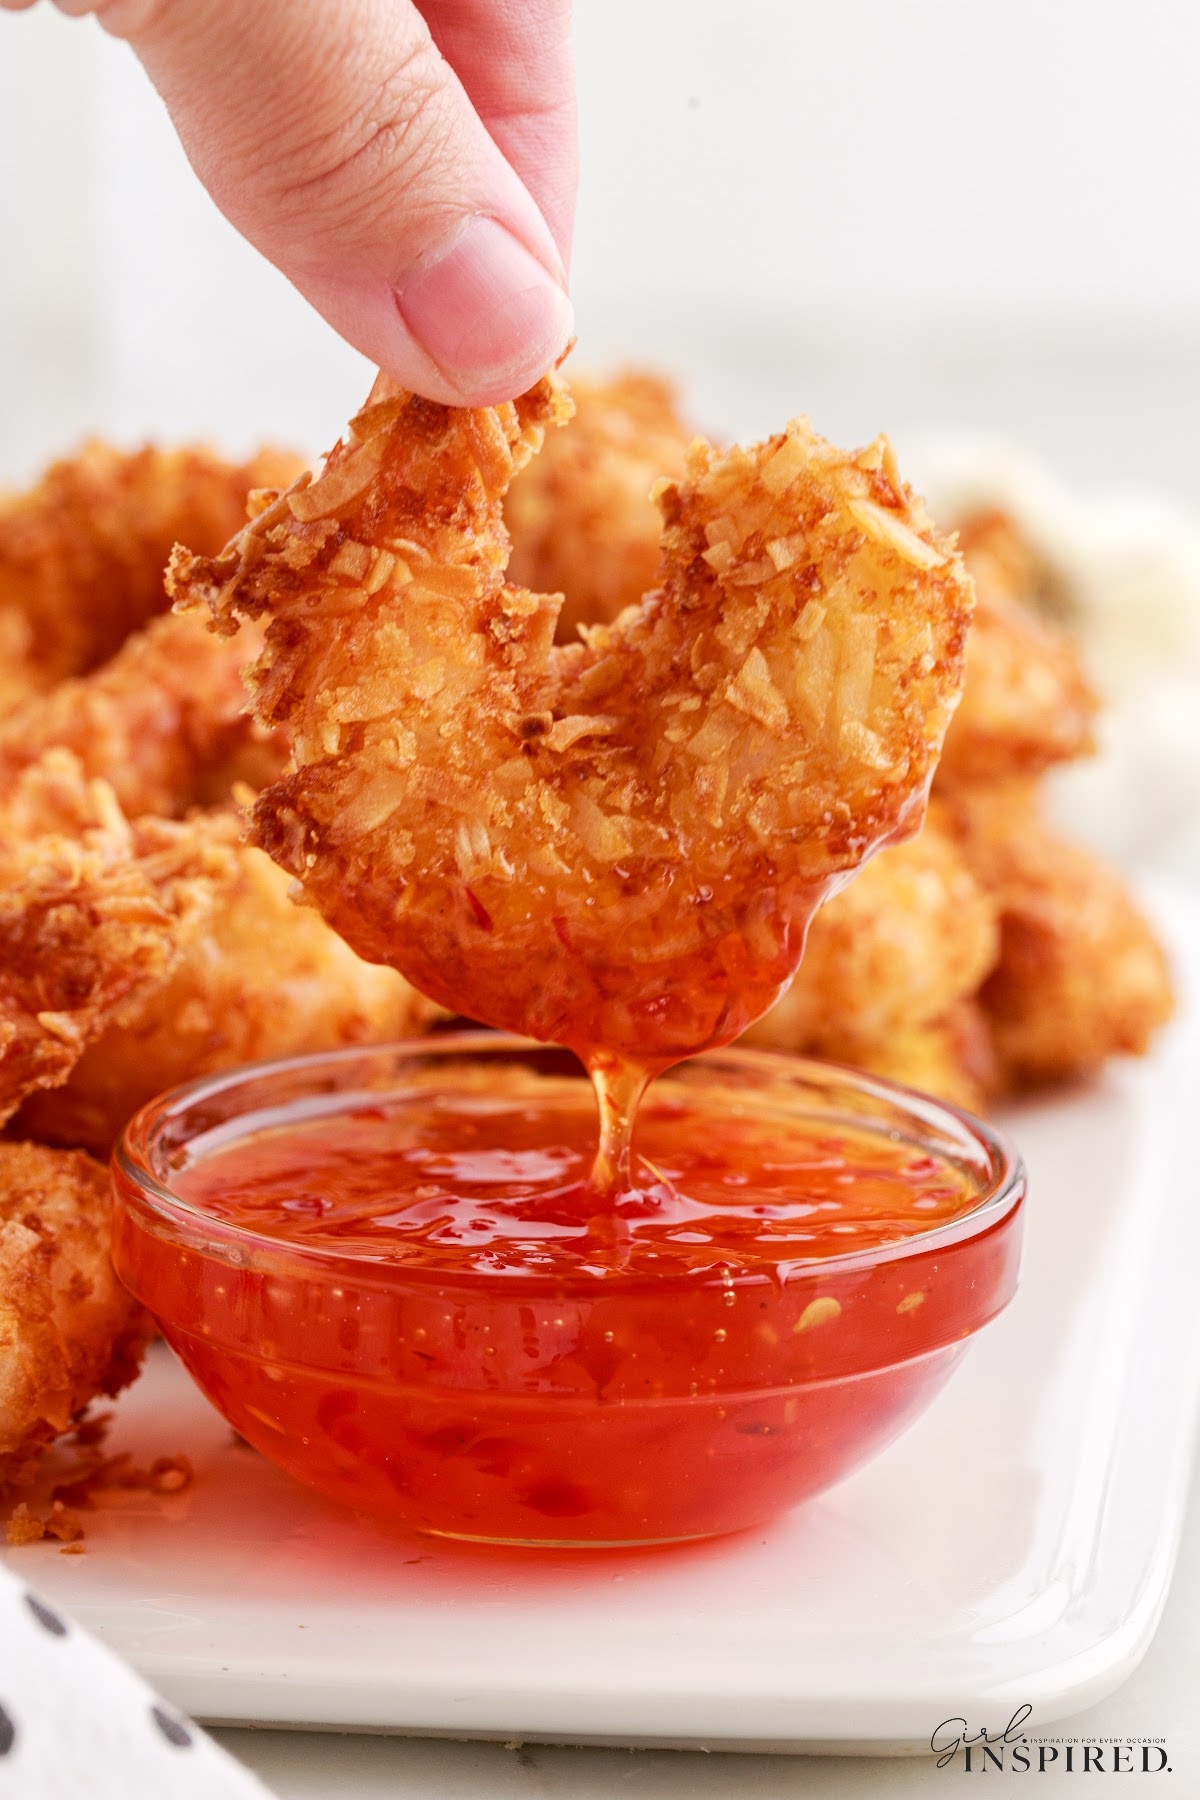 A piece of Coconut Fried Shrimp dipped in sauce.